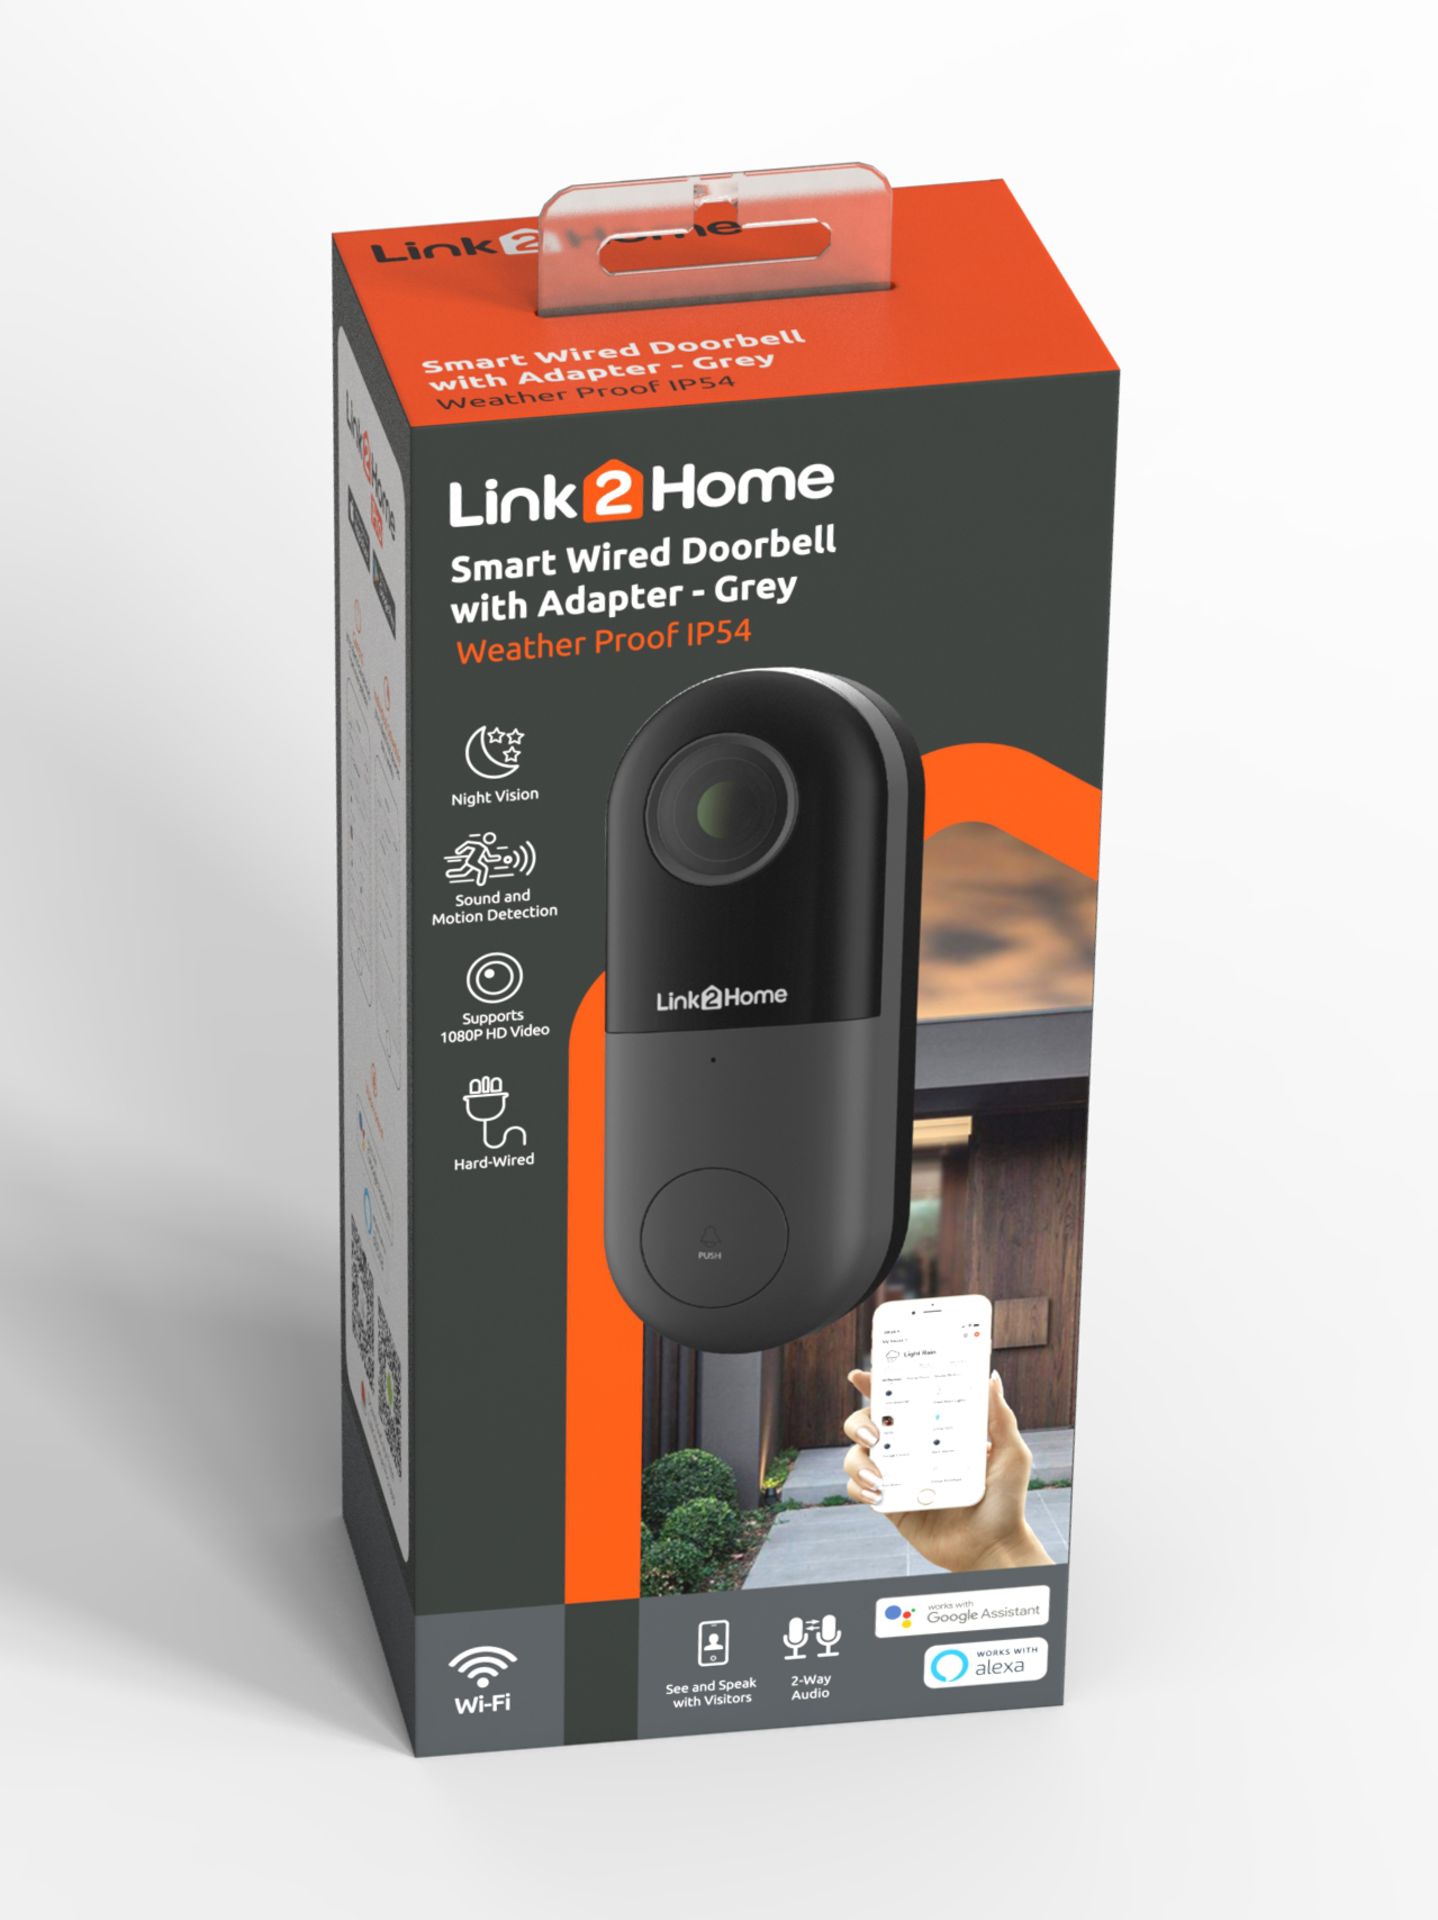 5 x Link2Home 'L2H BellWired' Hard Wired Doorbell/Cameras - New, boxed stock RRP £99. - Image 4 of 15